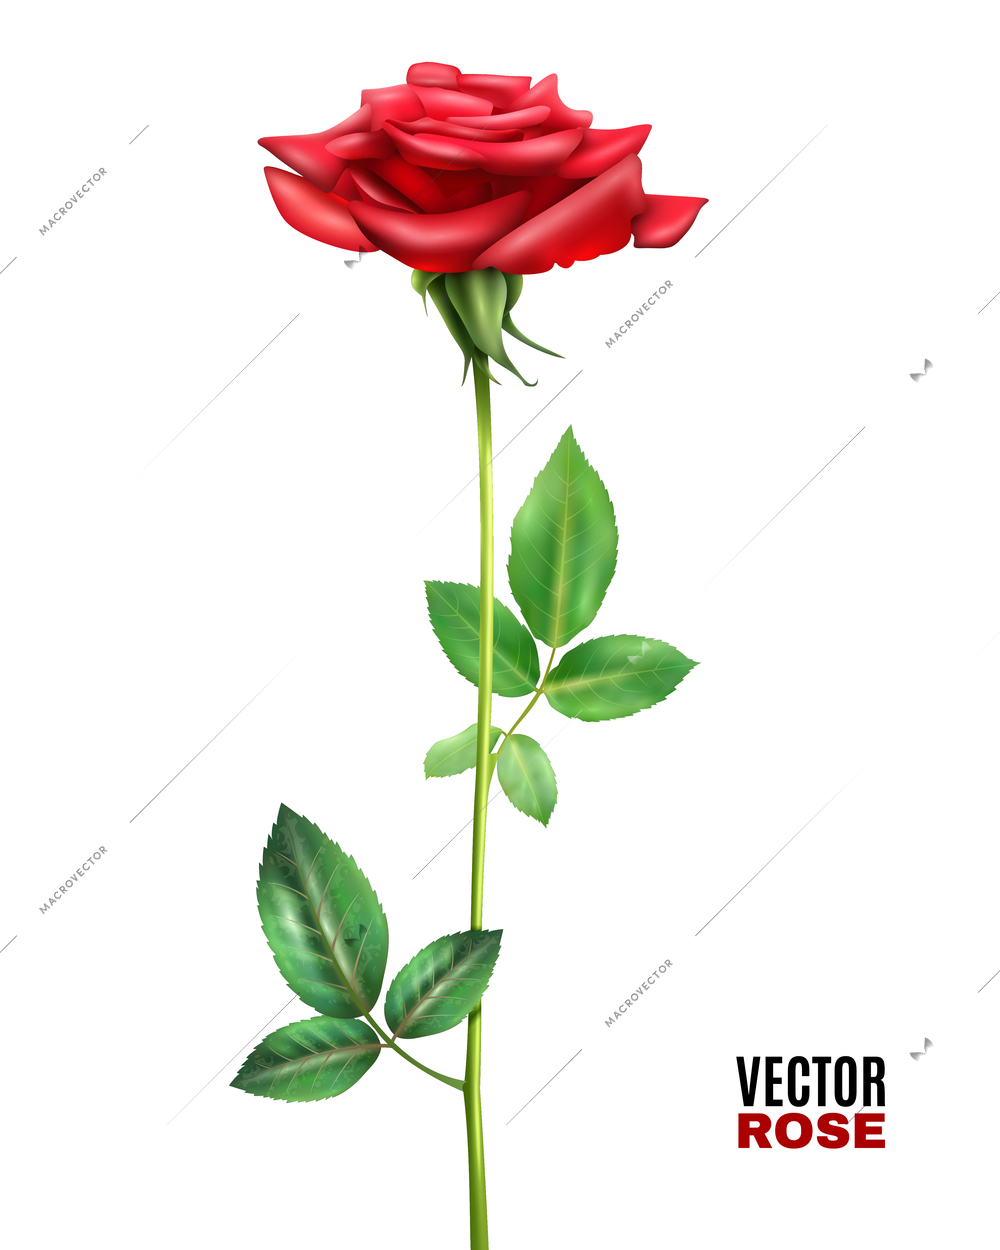 Beautiful blooming red rose flower with stalk and green leaves on white background realistic vector illustration